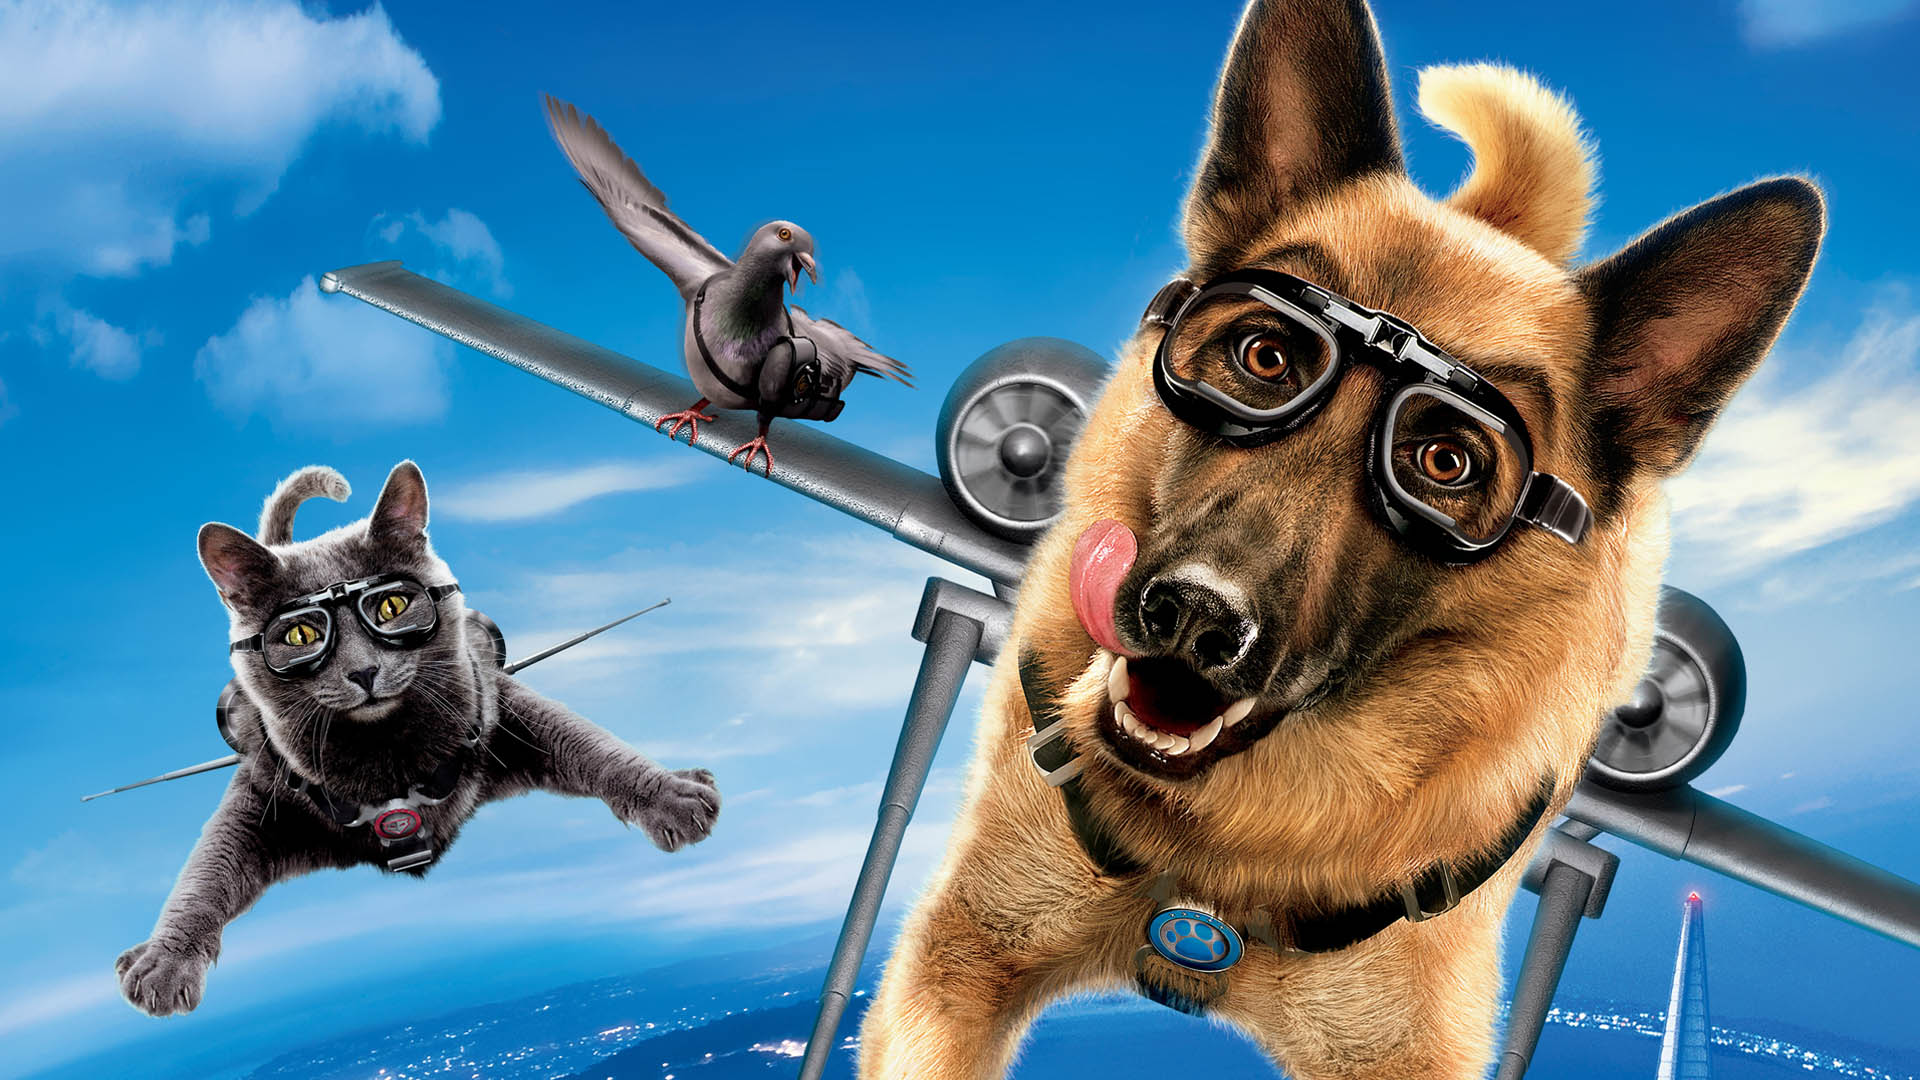 Movie Cats & Dogs The Revenge Of Kitty Galore HD Wallpaper